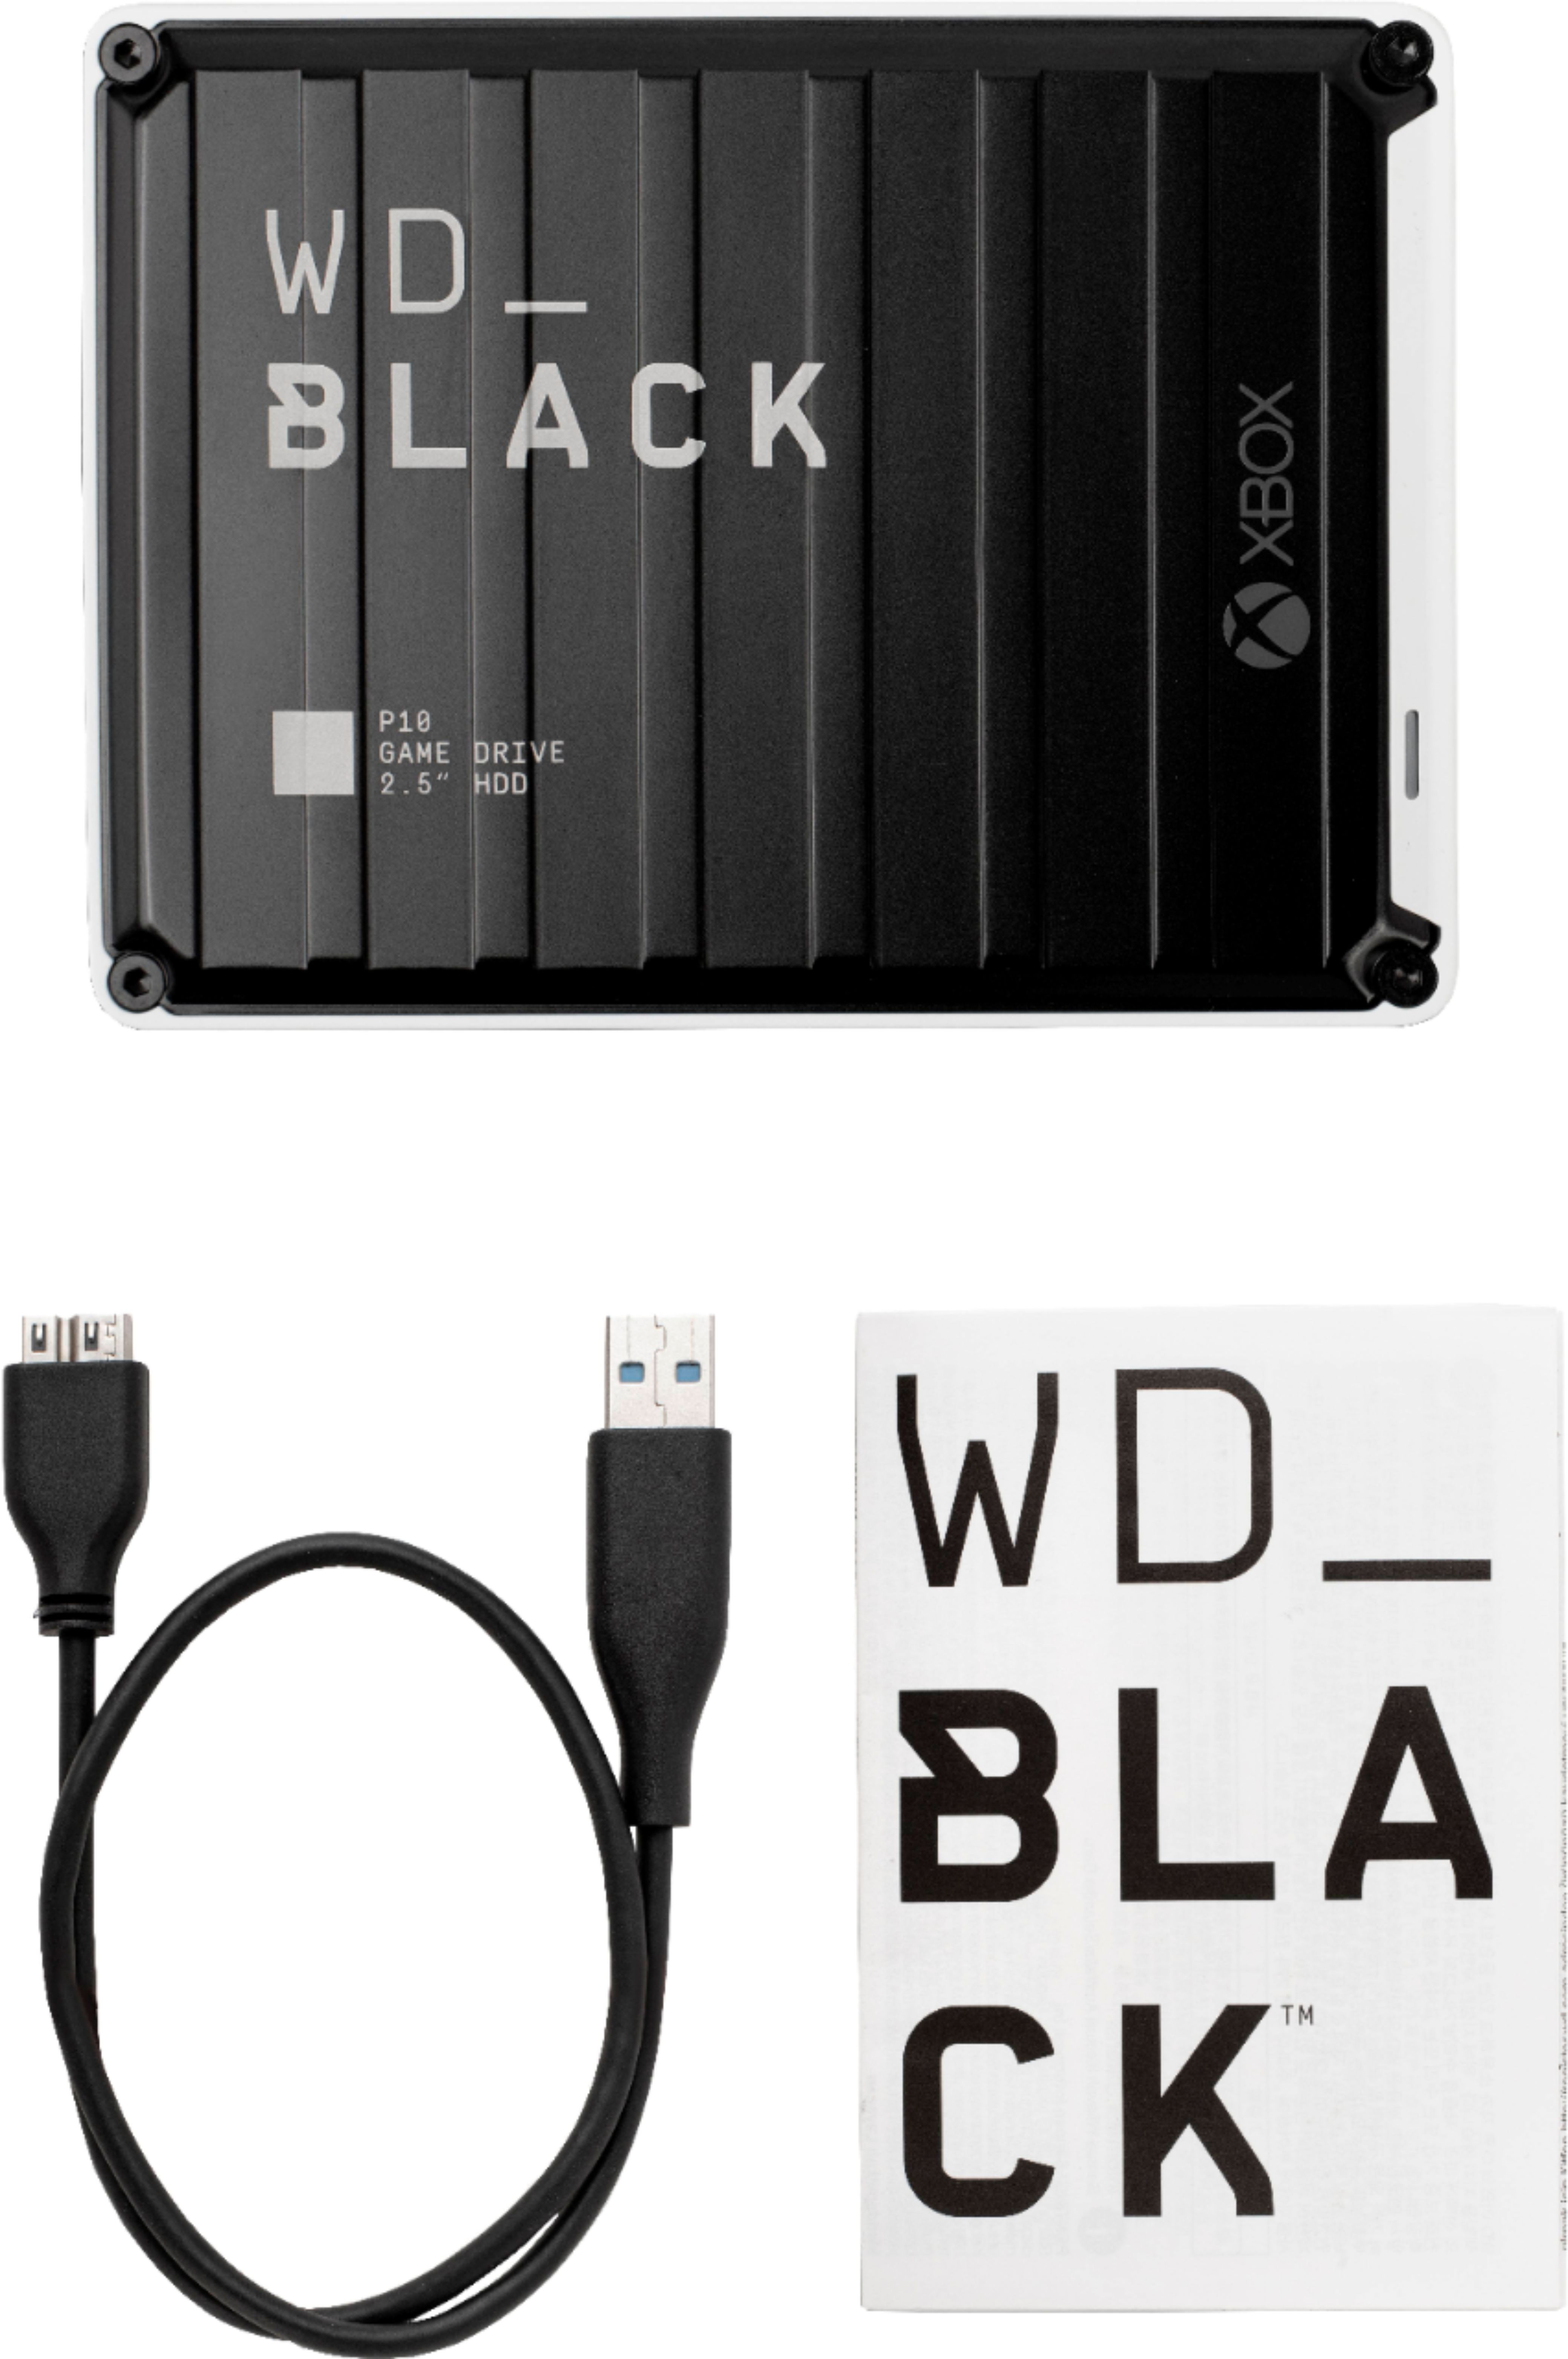 WD_Black P10 Game Drive for Xbox One 5 To